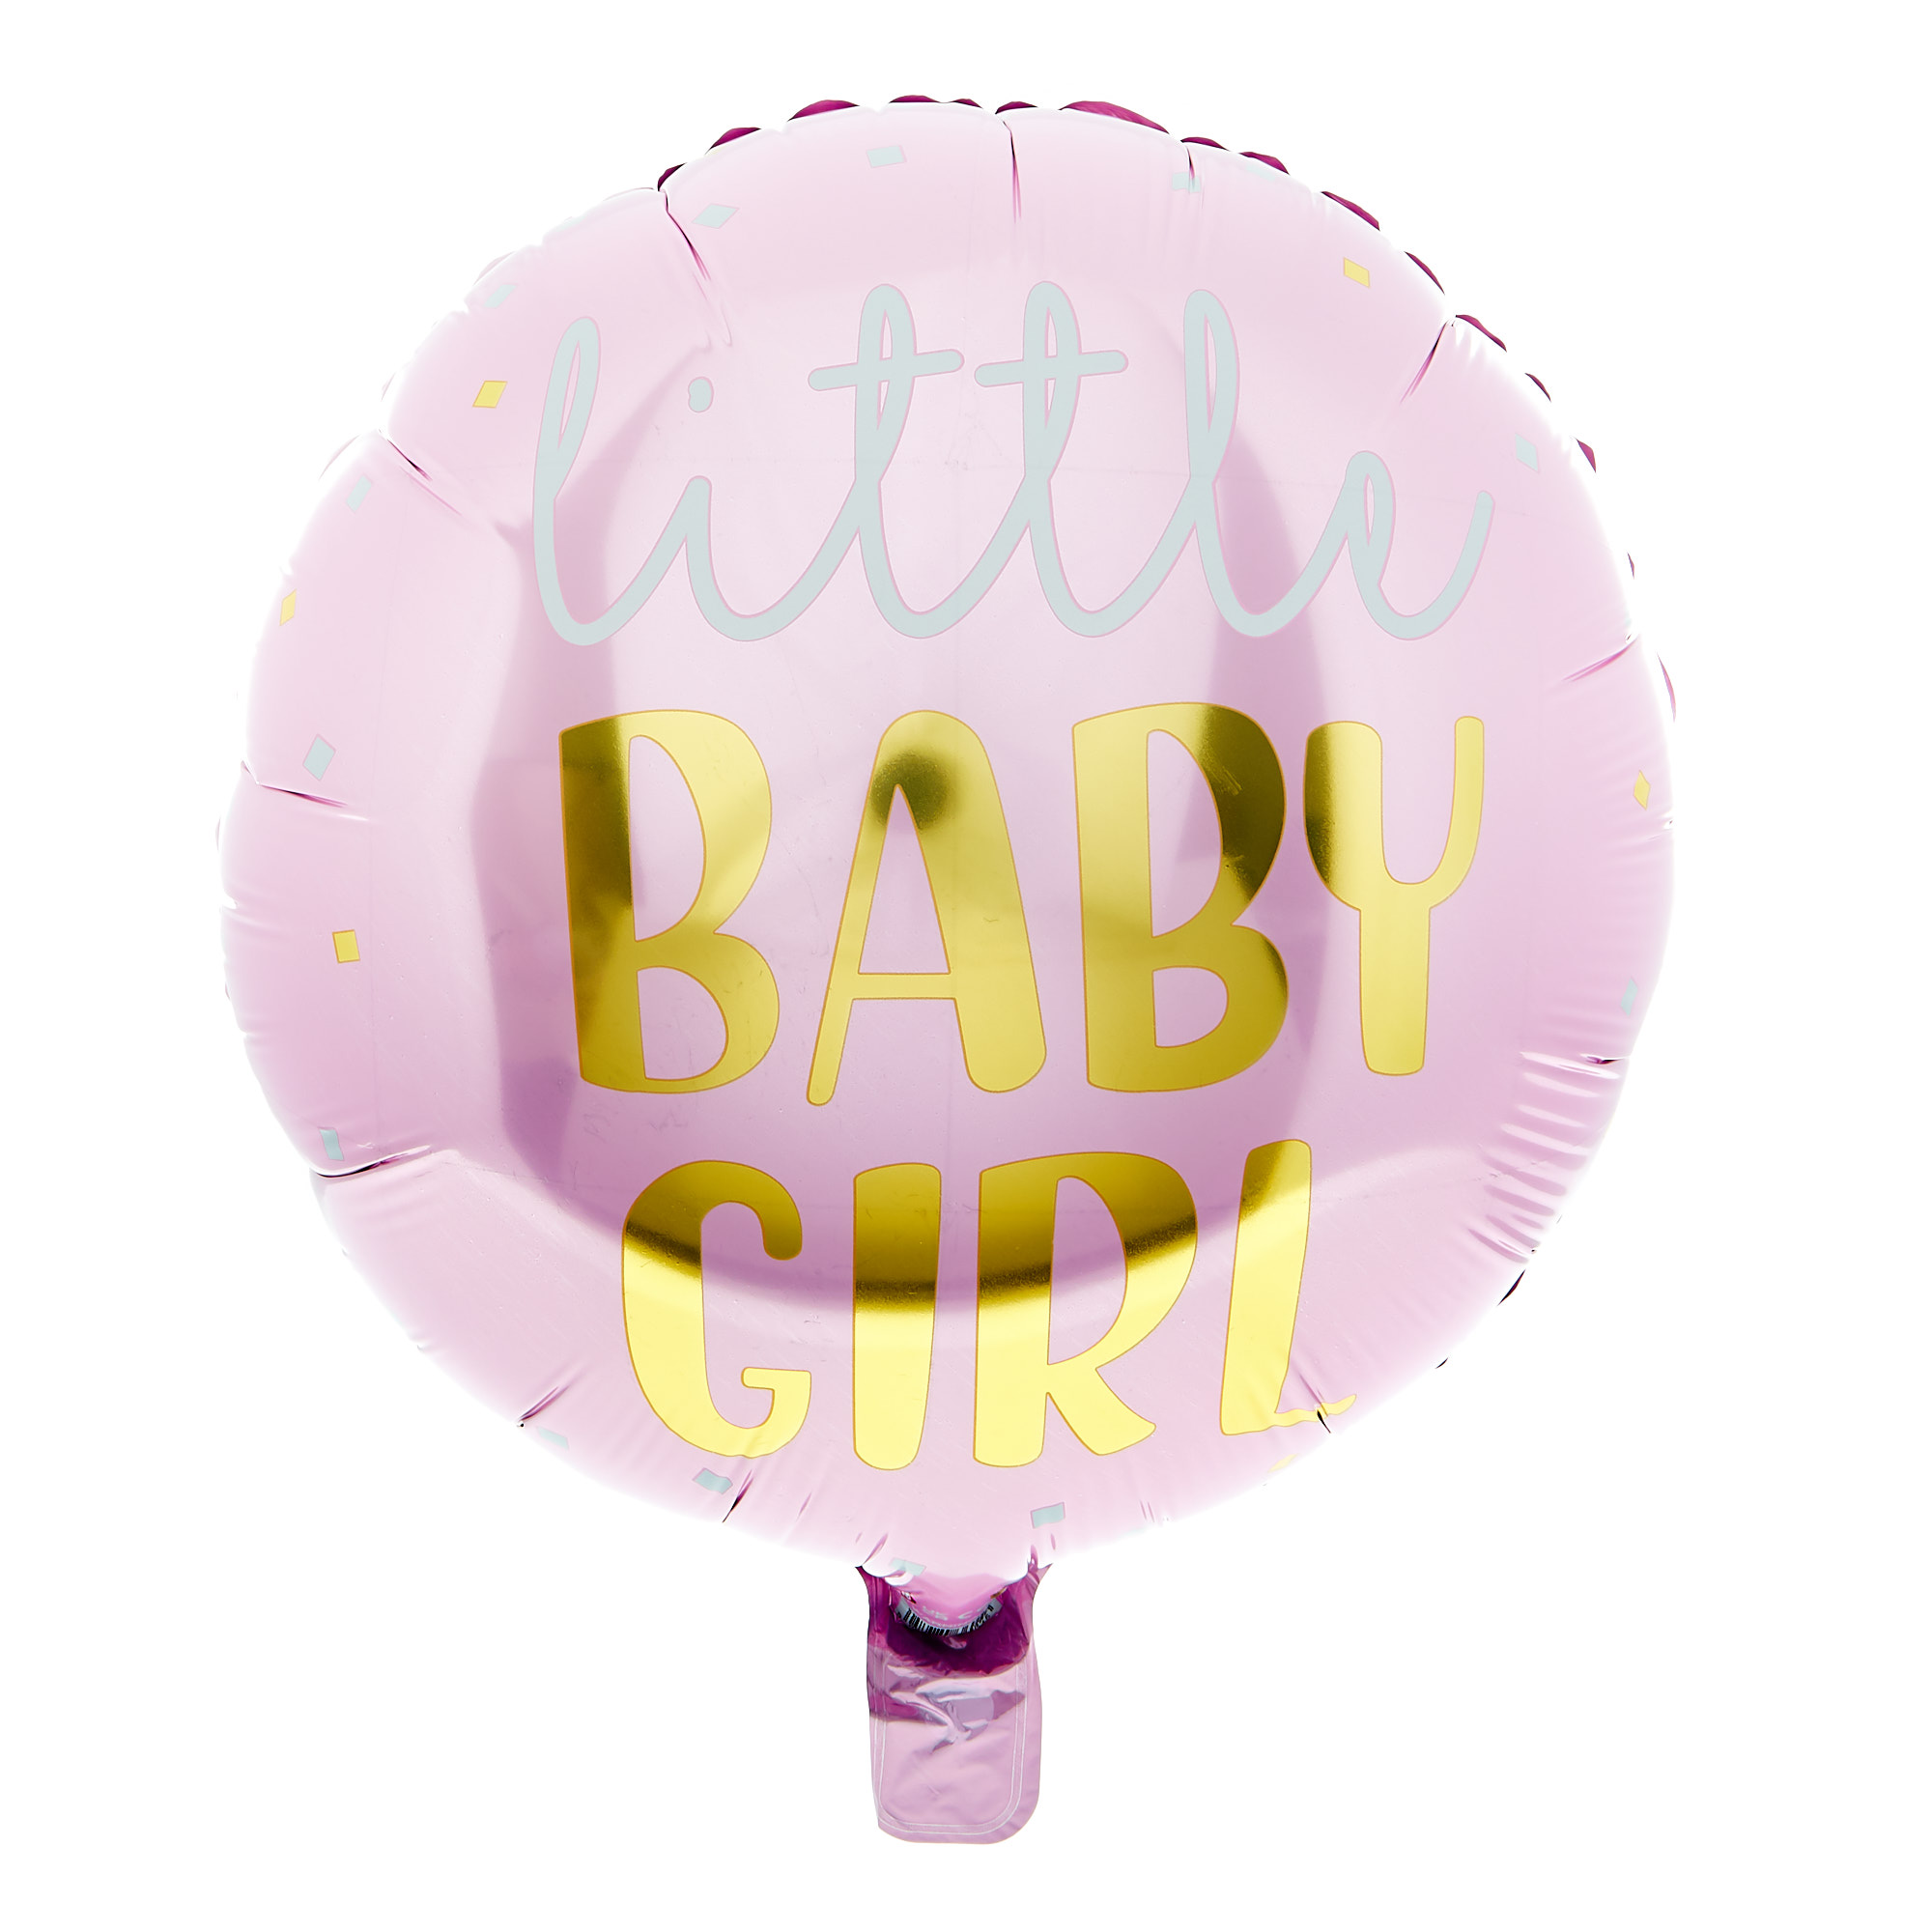 Little Baby Girl Balloon Bouquet - DELIVERED INFLATED!